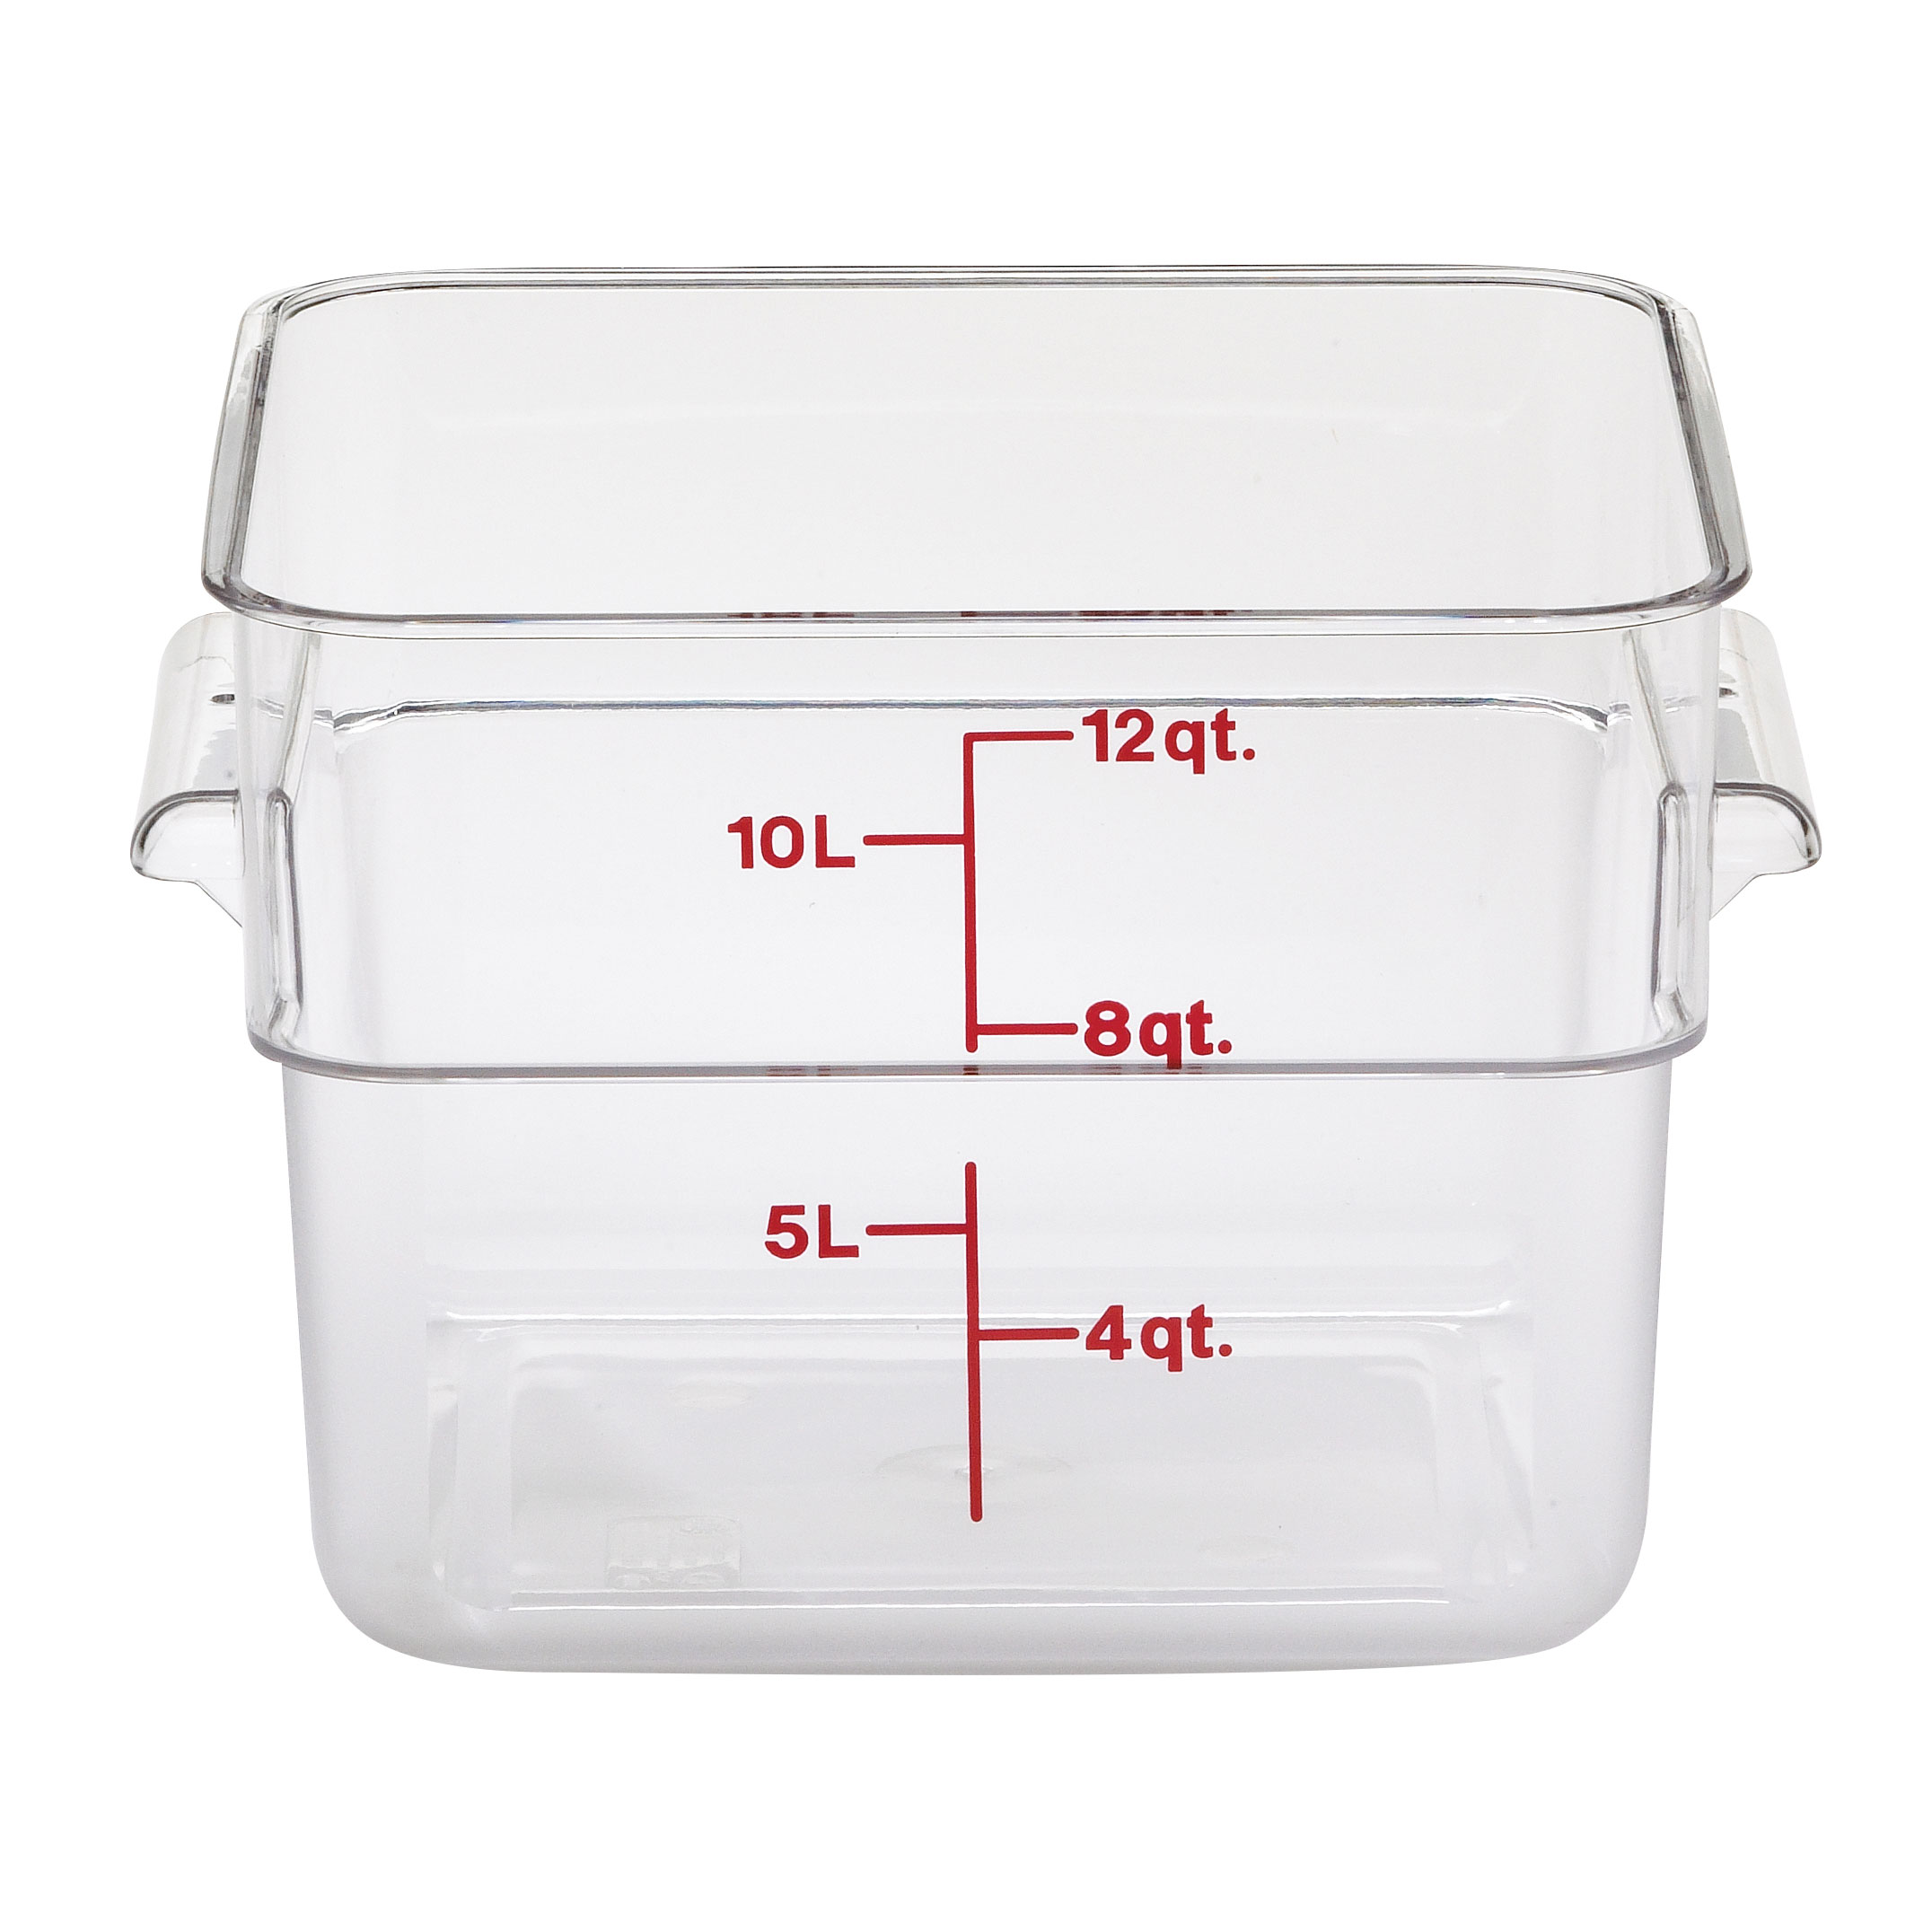 12qt. CLEAR SQUARE FOOD STORAGE CONTAINER, EACH, 10/21